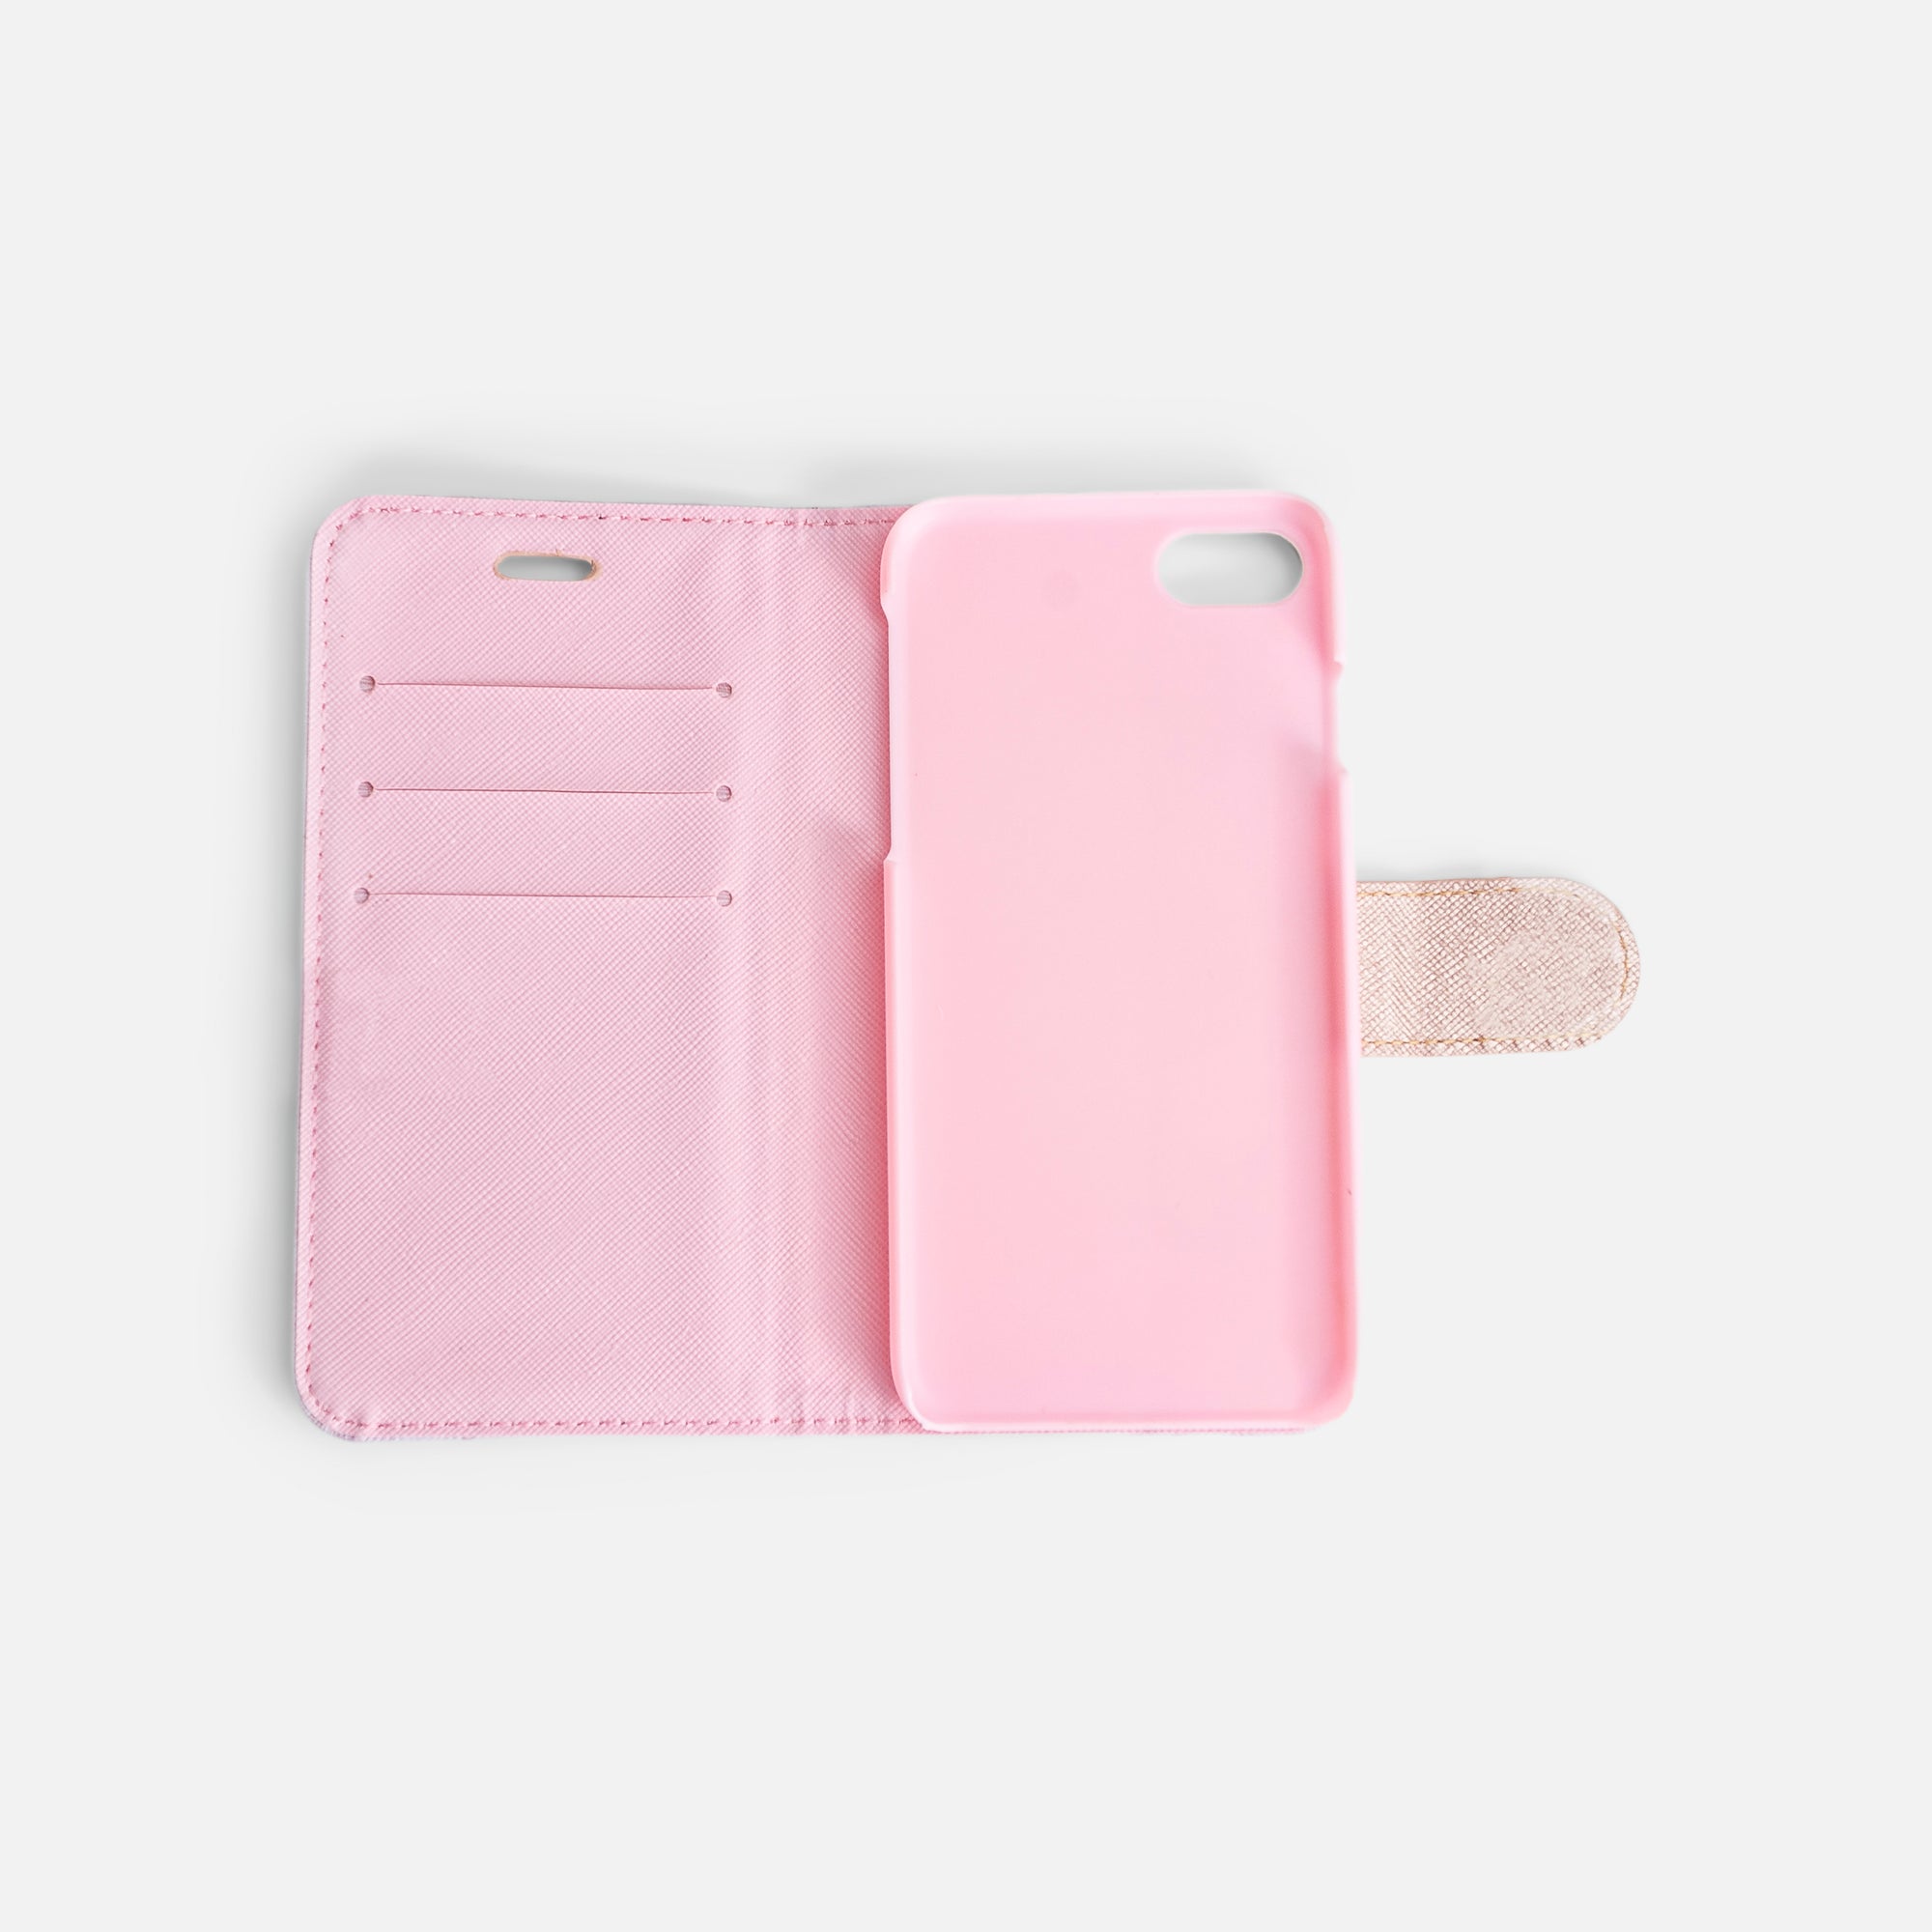 Pink case for iPhone 7